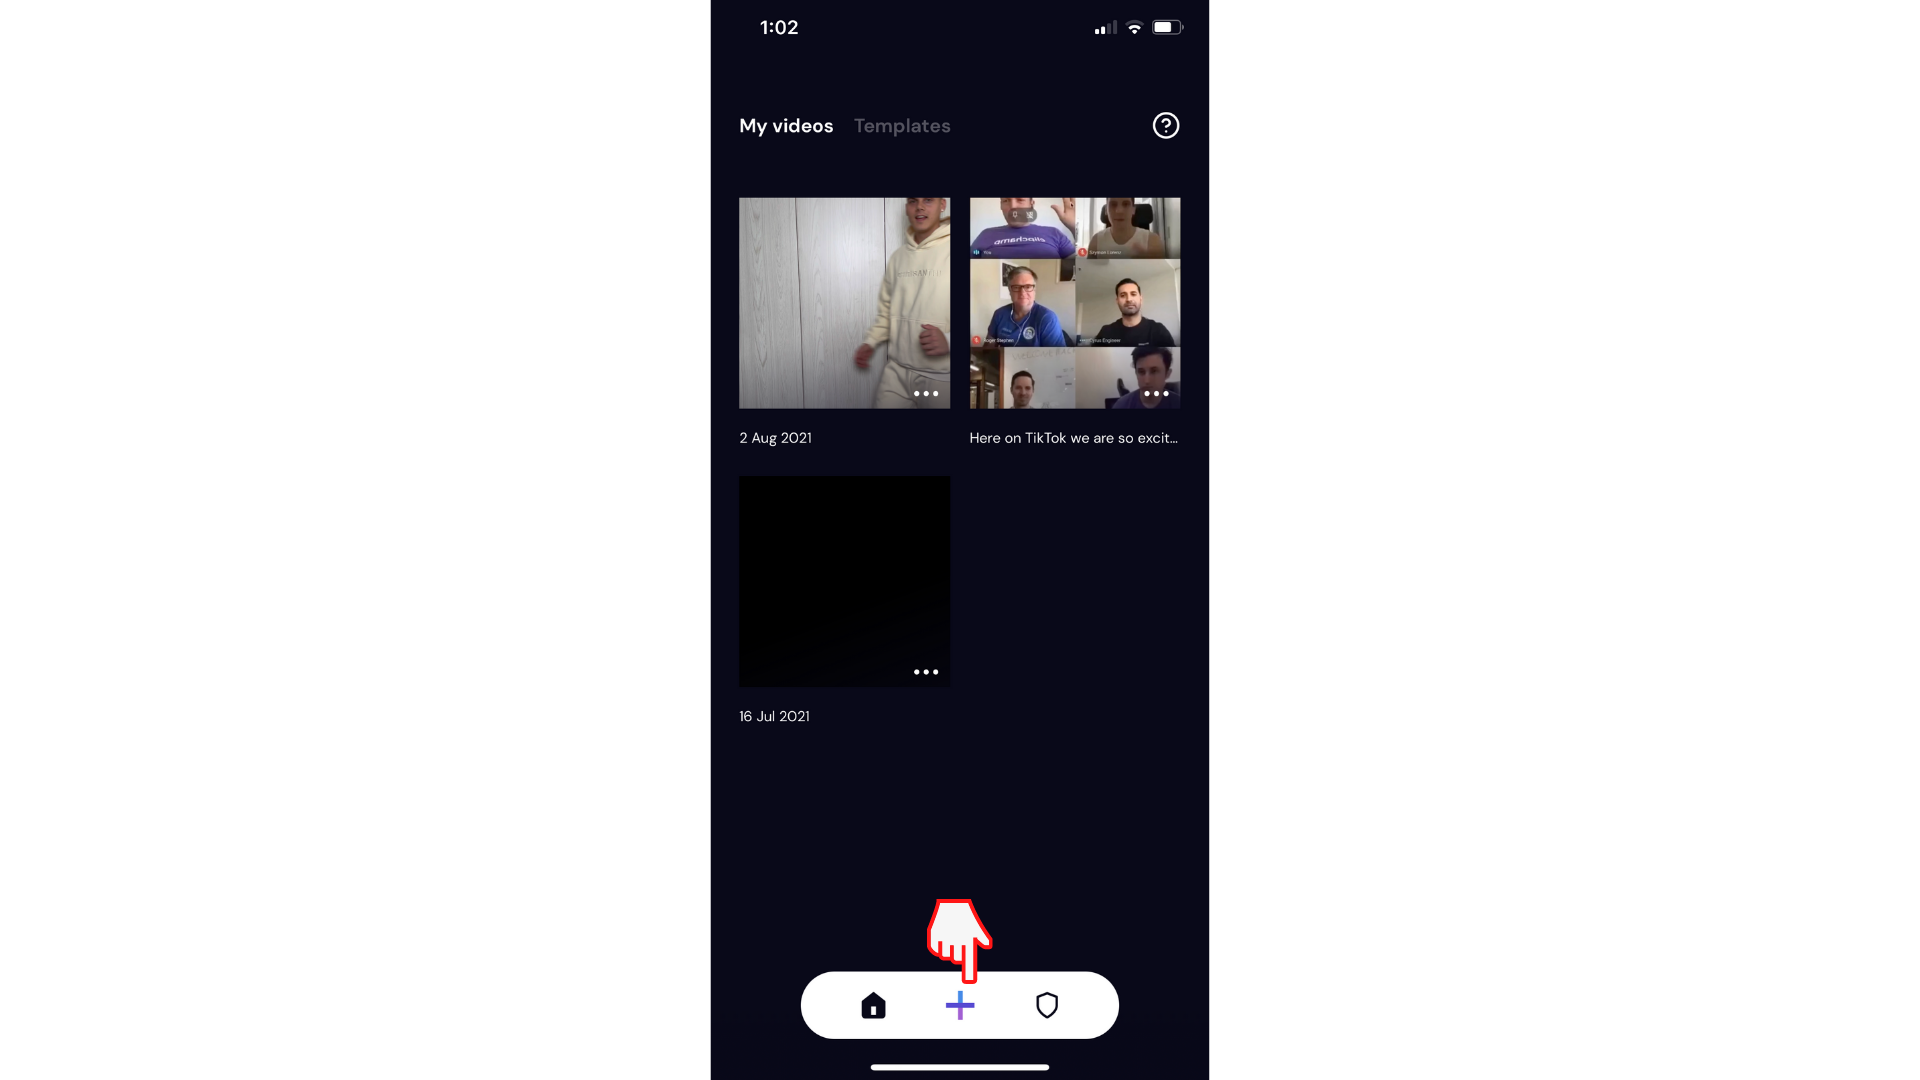 User tapping plus button to create new video